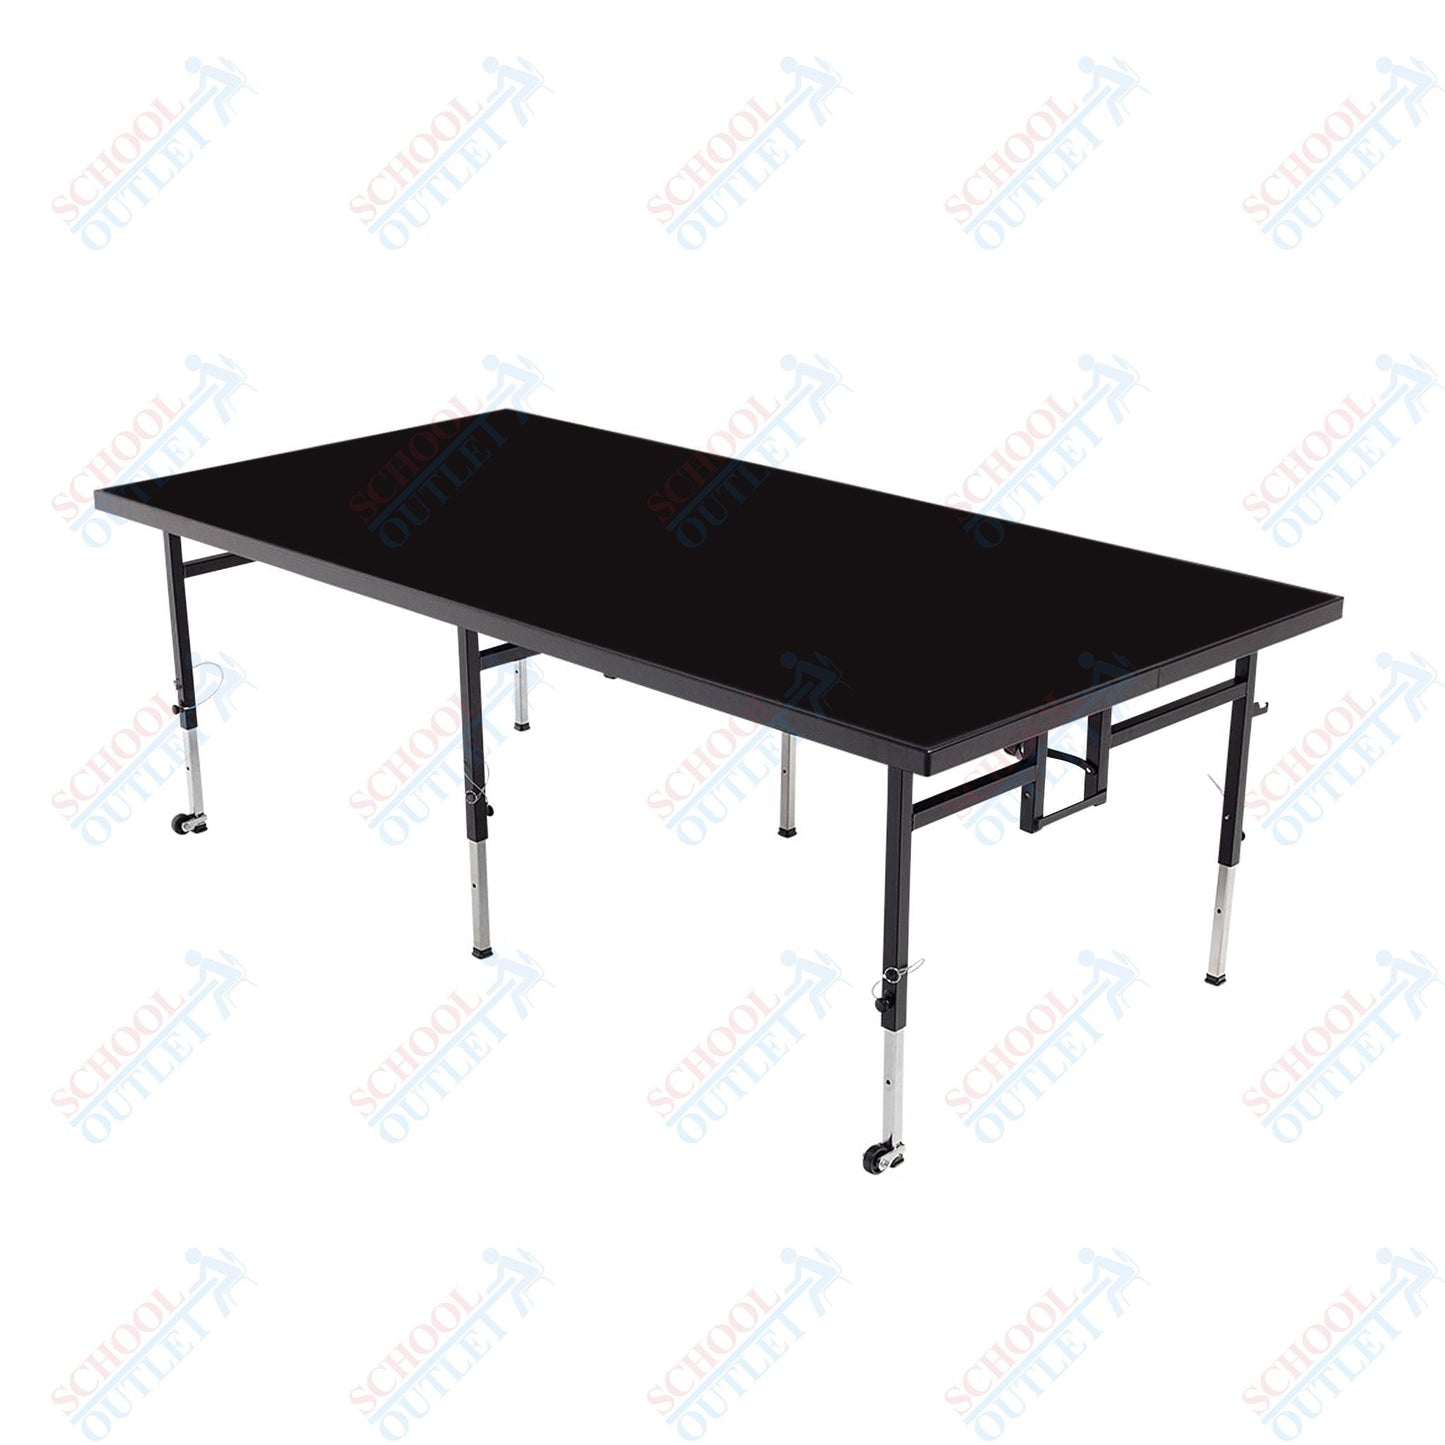 AmTab Adjustable Height Stage - Polypropylene Top - 36"W x 48"L x Adjustable 16" to 24"H (AmTab AMT-STA3416P) - SchoolOutlet